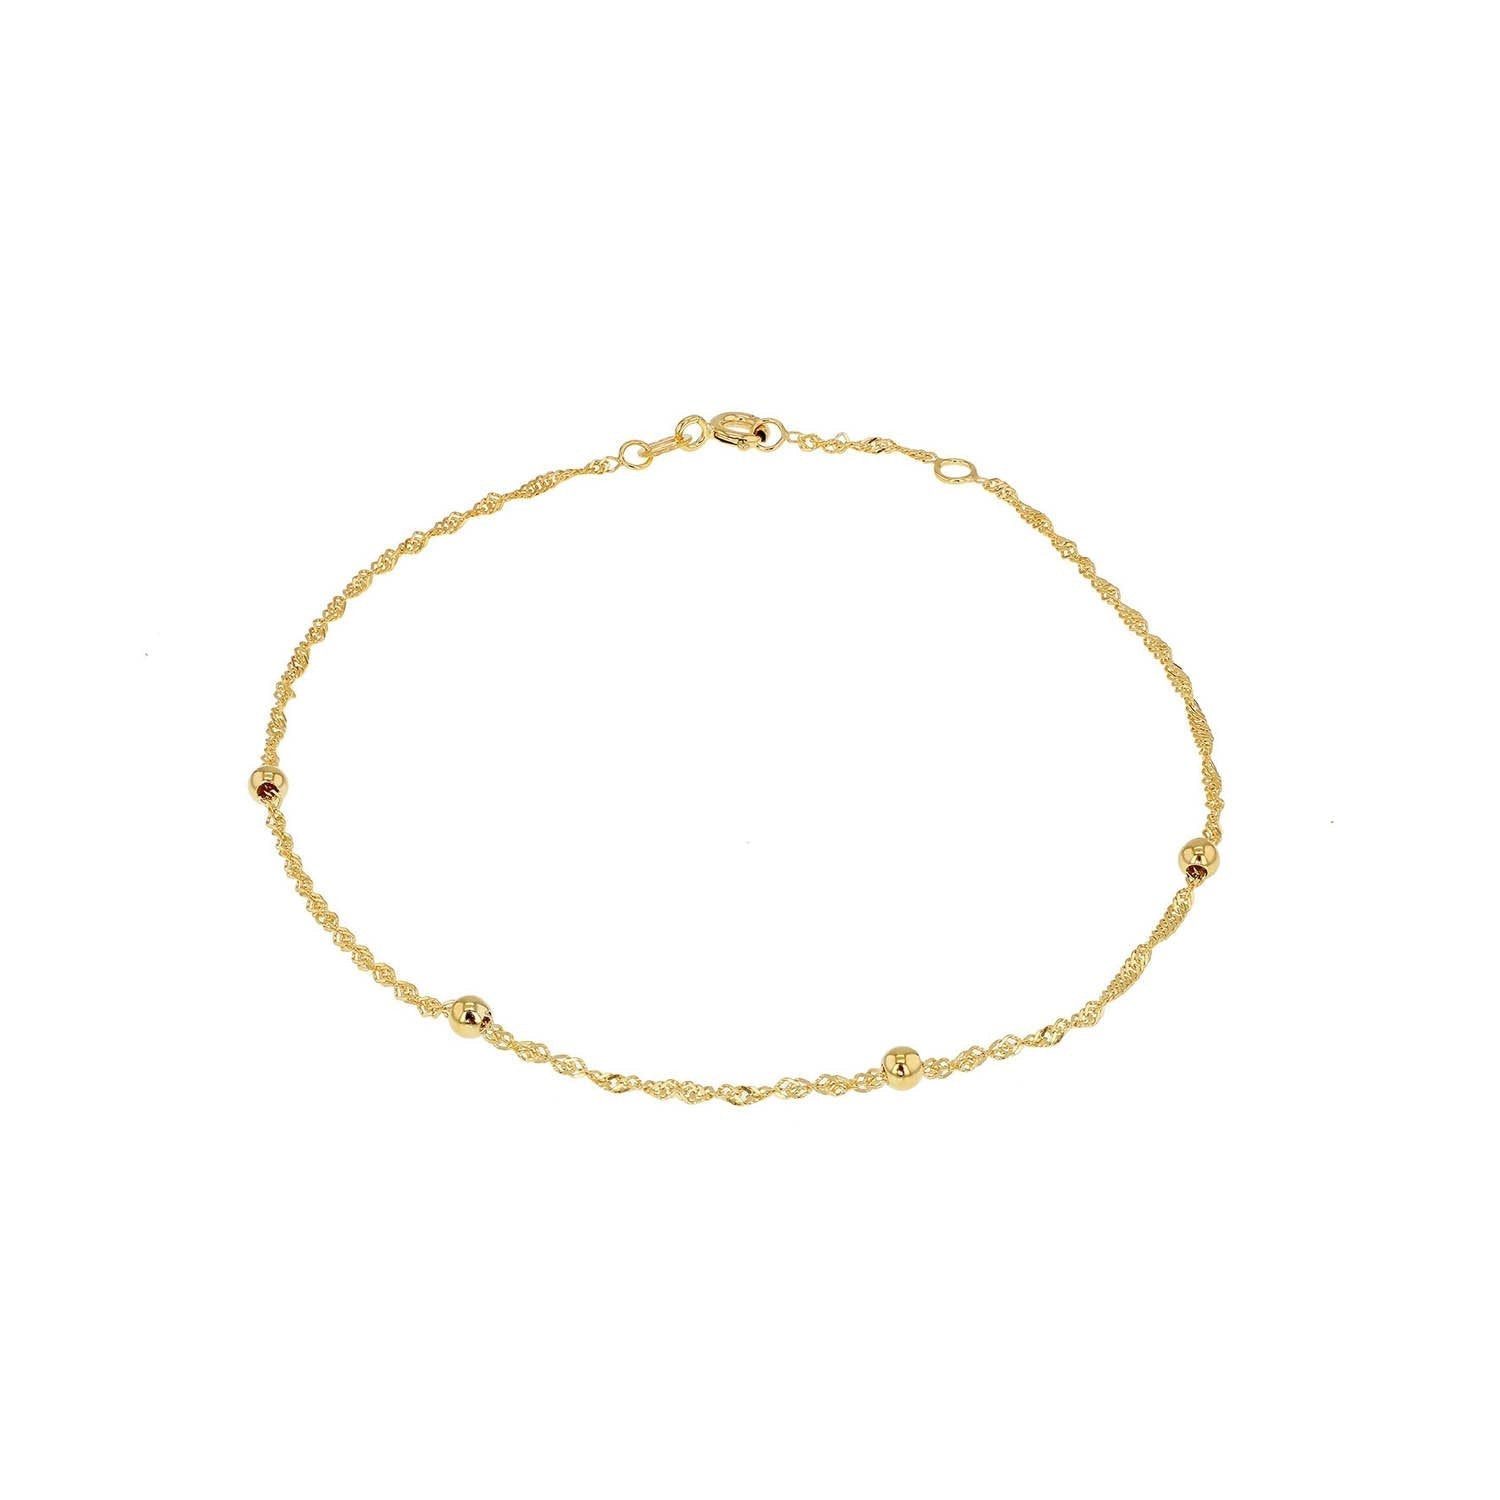 9ct Yellow Gold 3mm Balls and Twist Curb Chain Adjustable Anklet 22.5cm-24cm